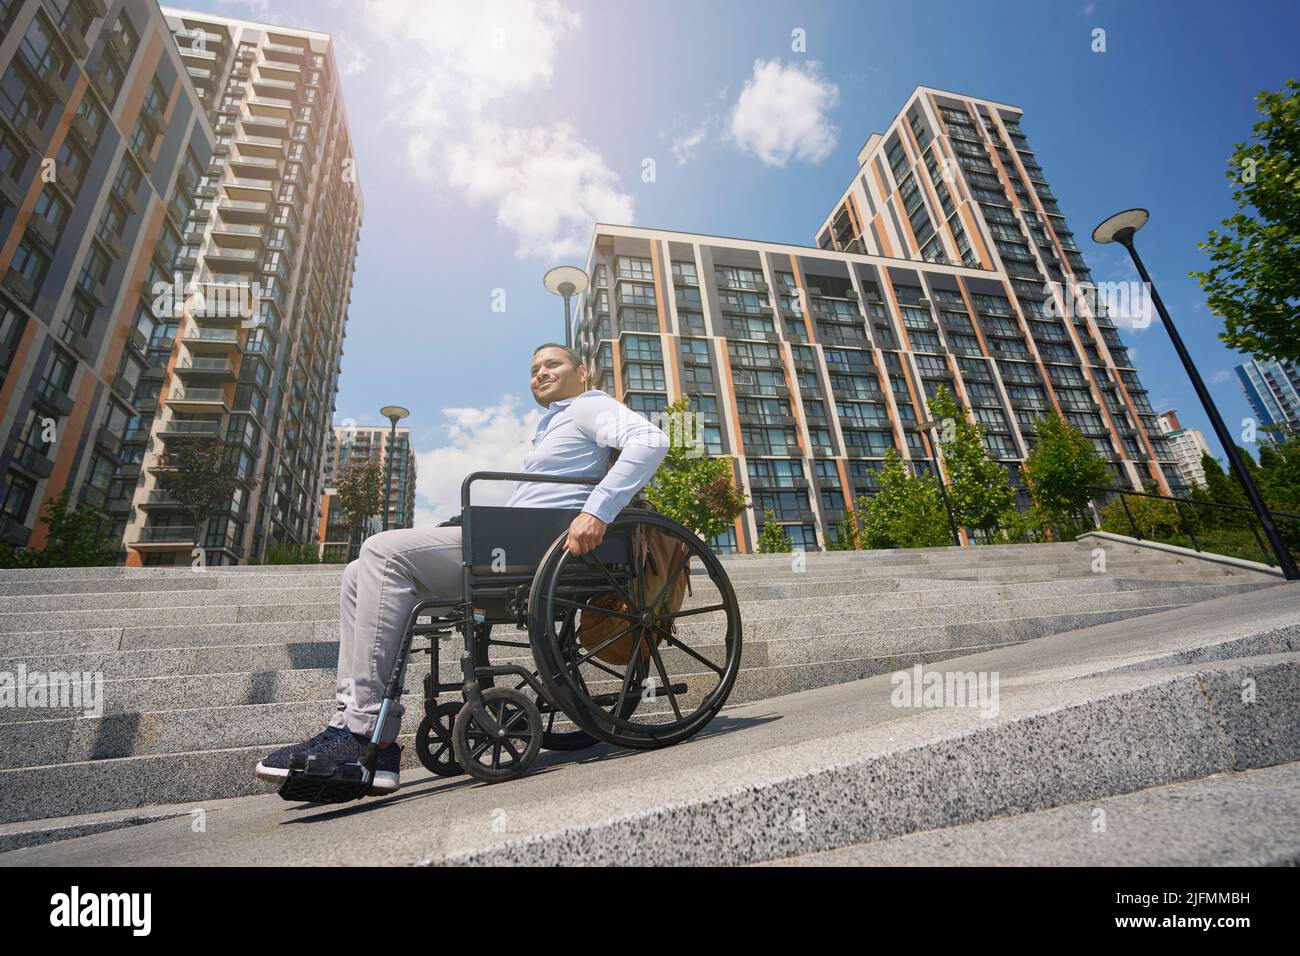 Young man seated in wheel chair going down stairs Stock Photo